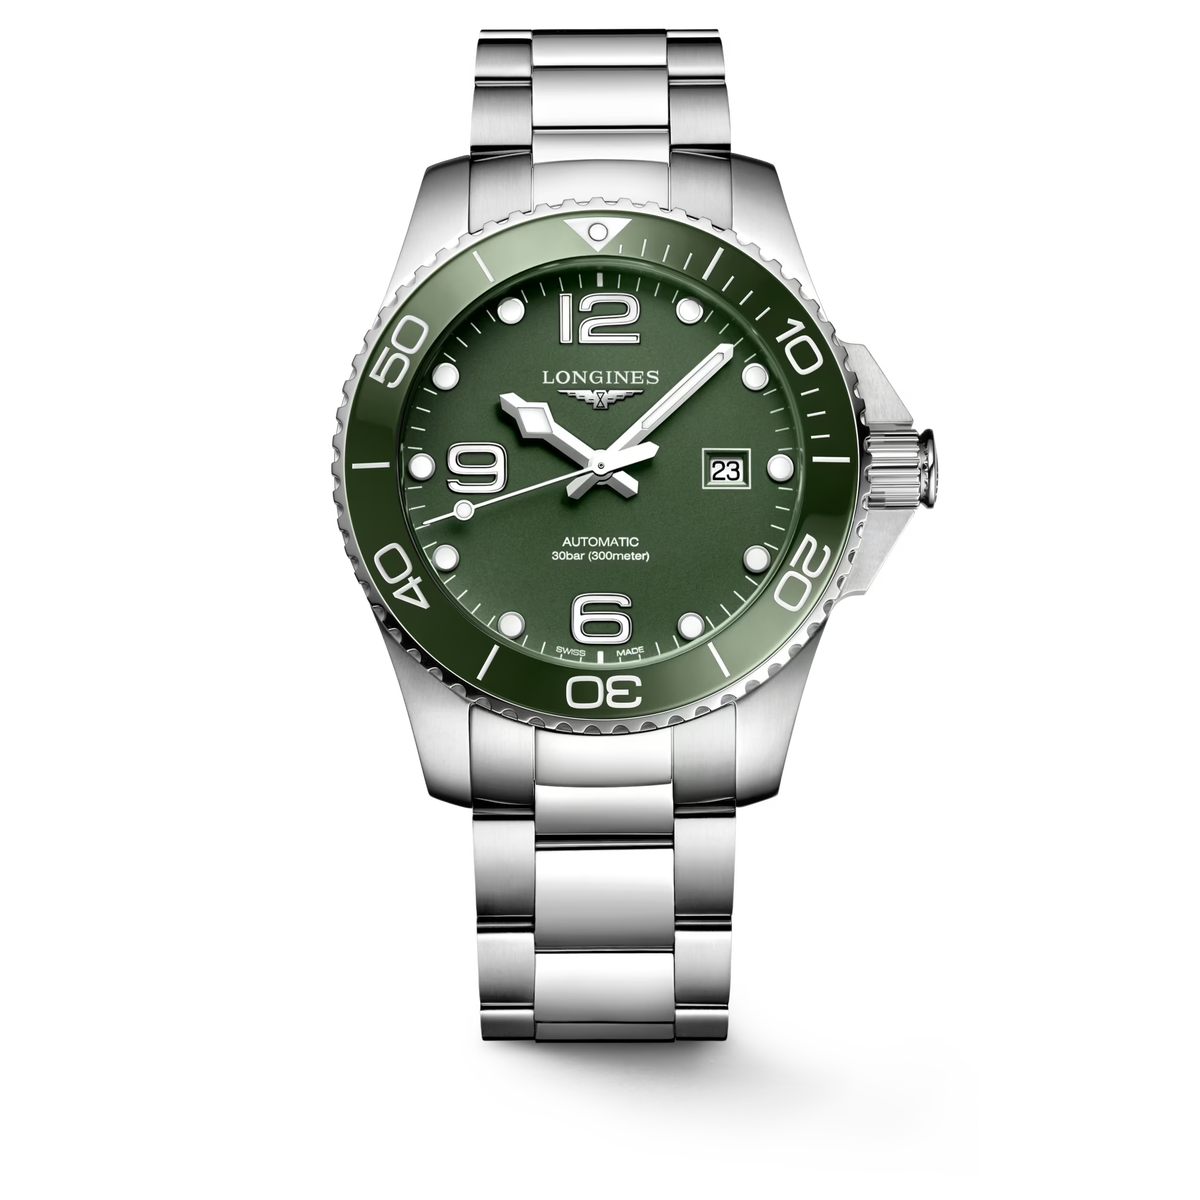 LONGINES HYDROCONQUEST CERAMIC GREEN DIAL 41MM AUTOMATIC DIVING WATCH L37814066